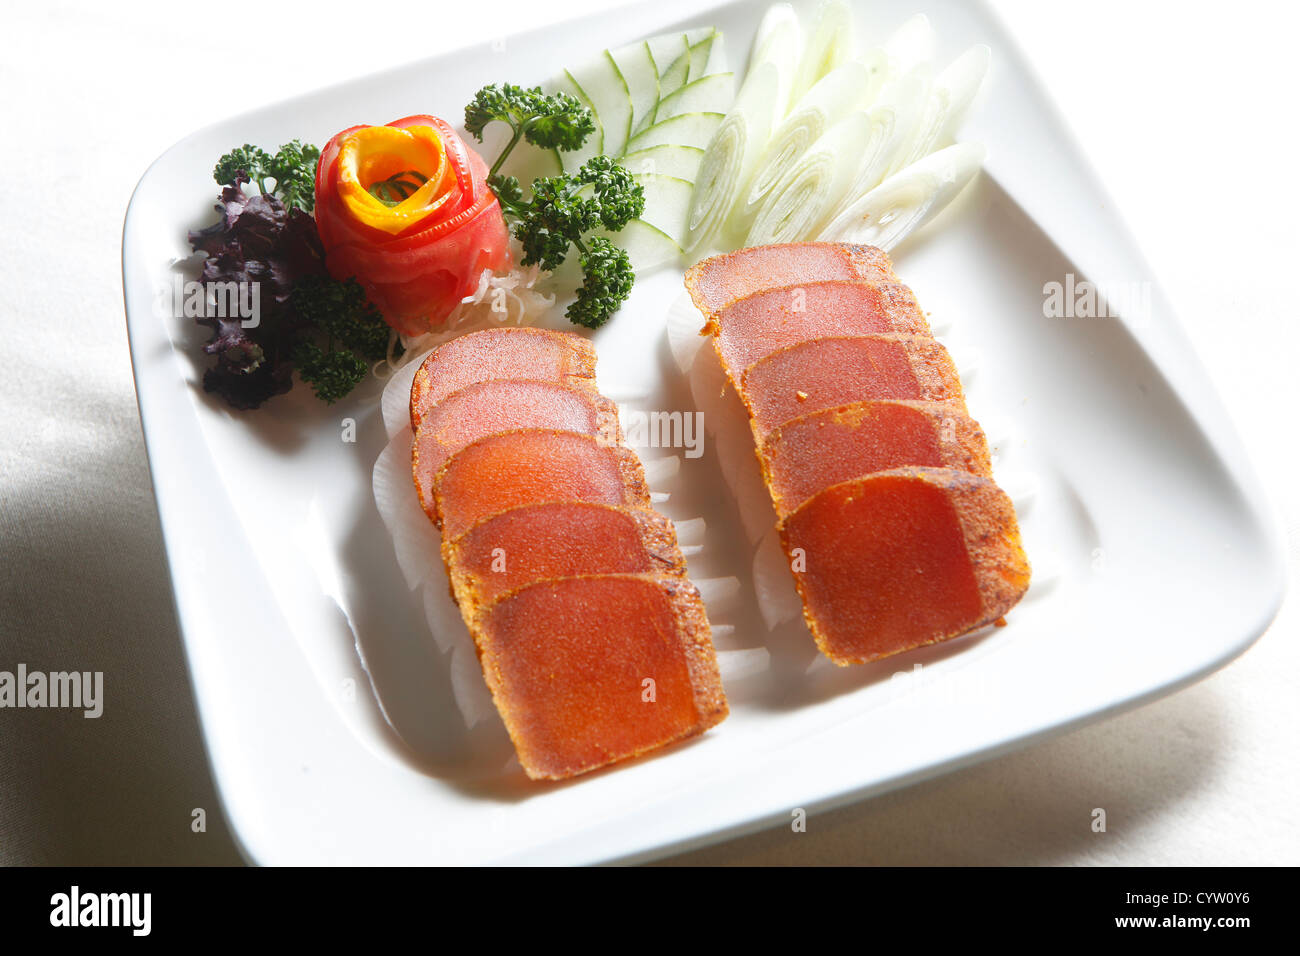 Slices of mullet Roe in the dish Stock Photo: 51566010 - Alamy